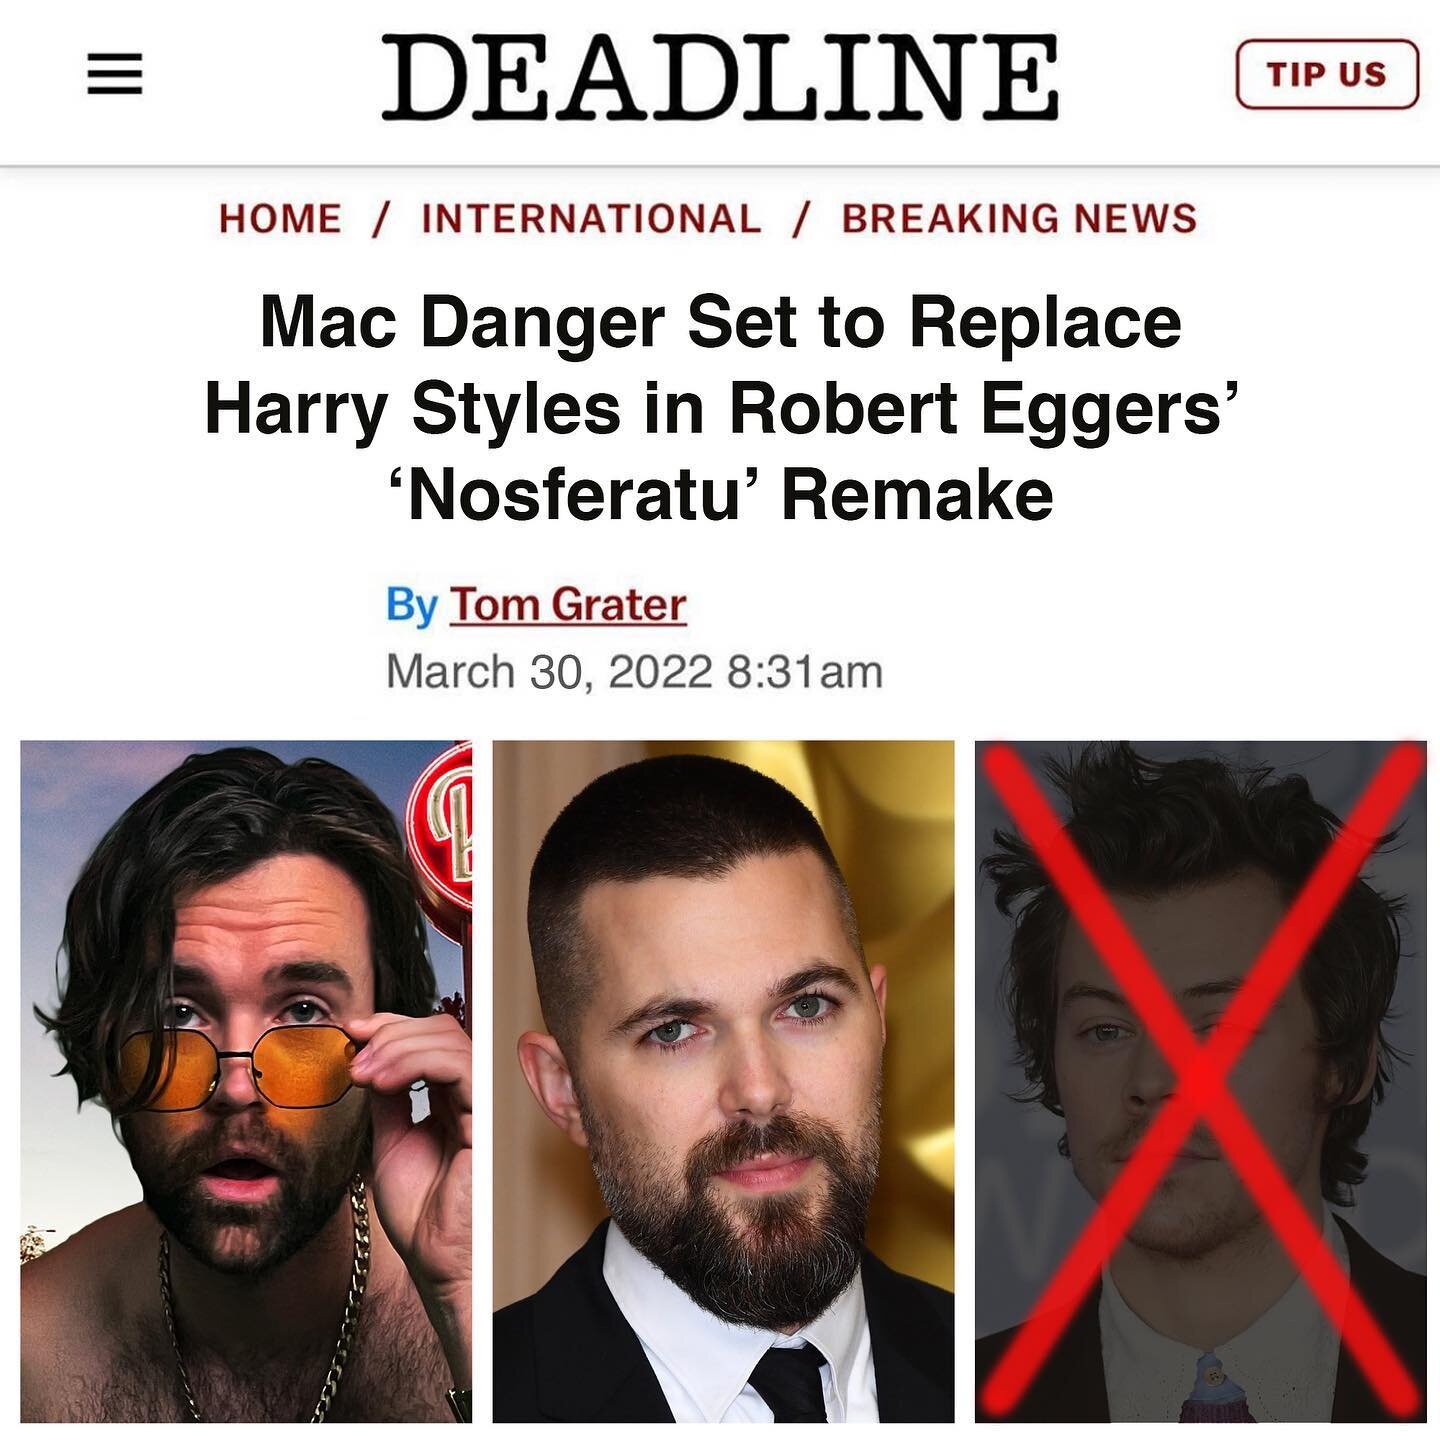 WOW!

Really excited to work on this classic movie with #RobertEggers 

I think Eggers kicking @harrystyles out of this role was the right call. Stick to music, #HarryStyles

#Nosferatu #deadline #harrystyles #film #isthisreallife #movies #seeyouatth